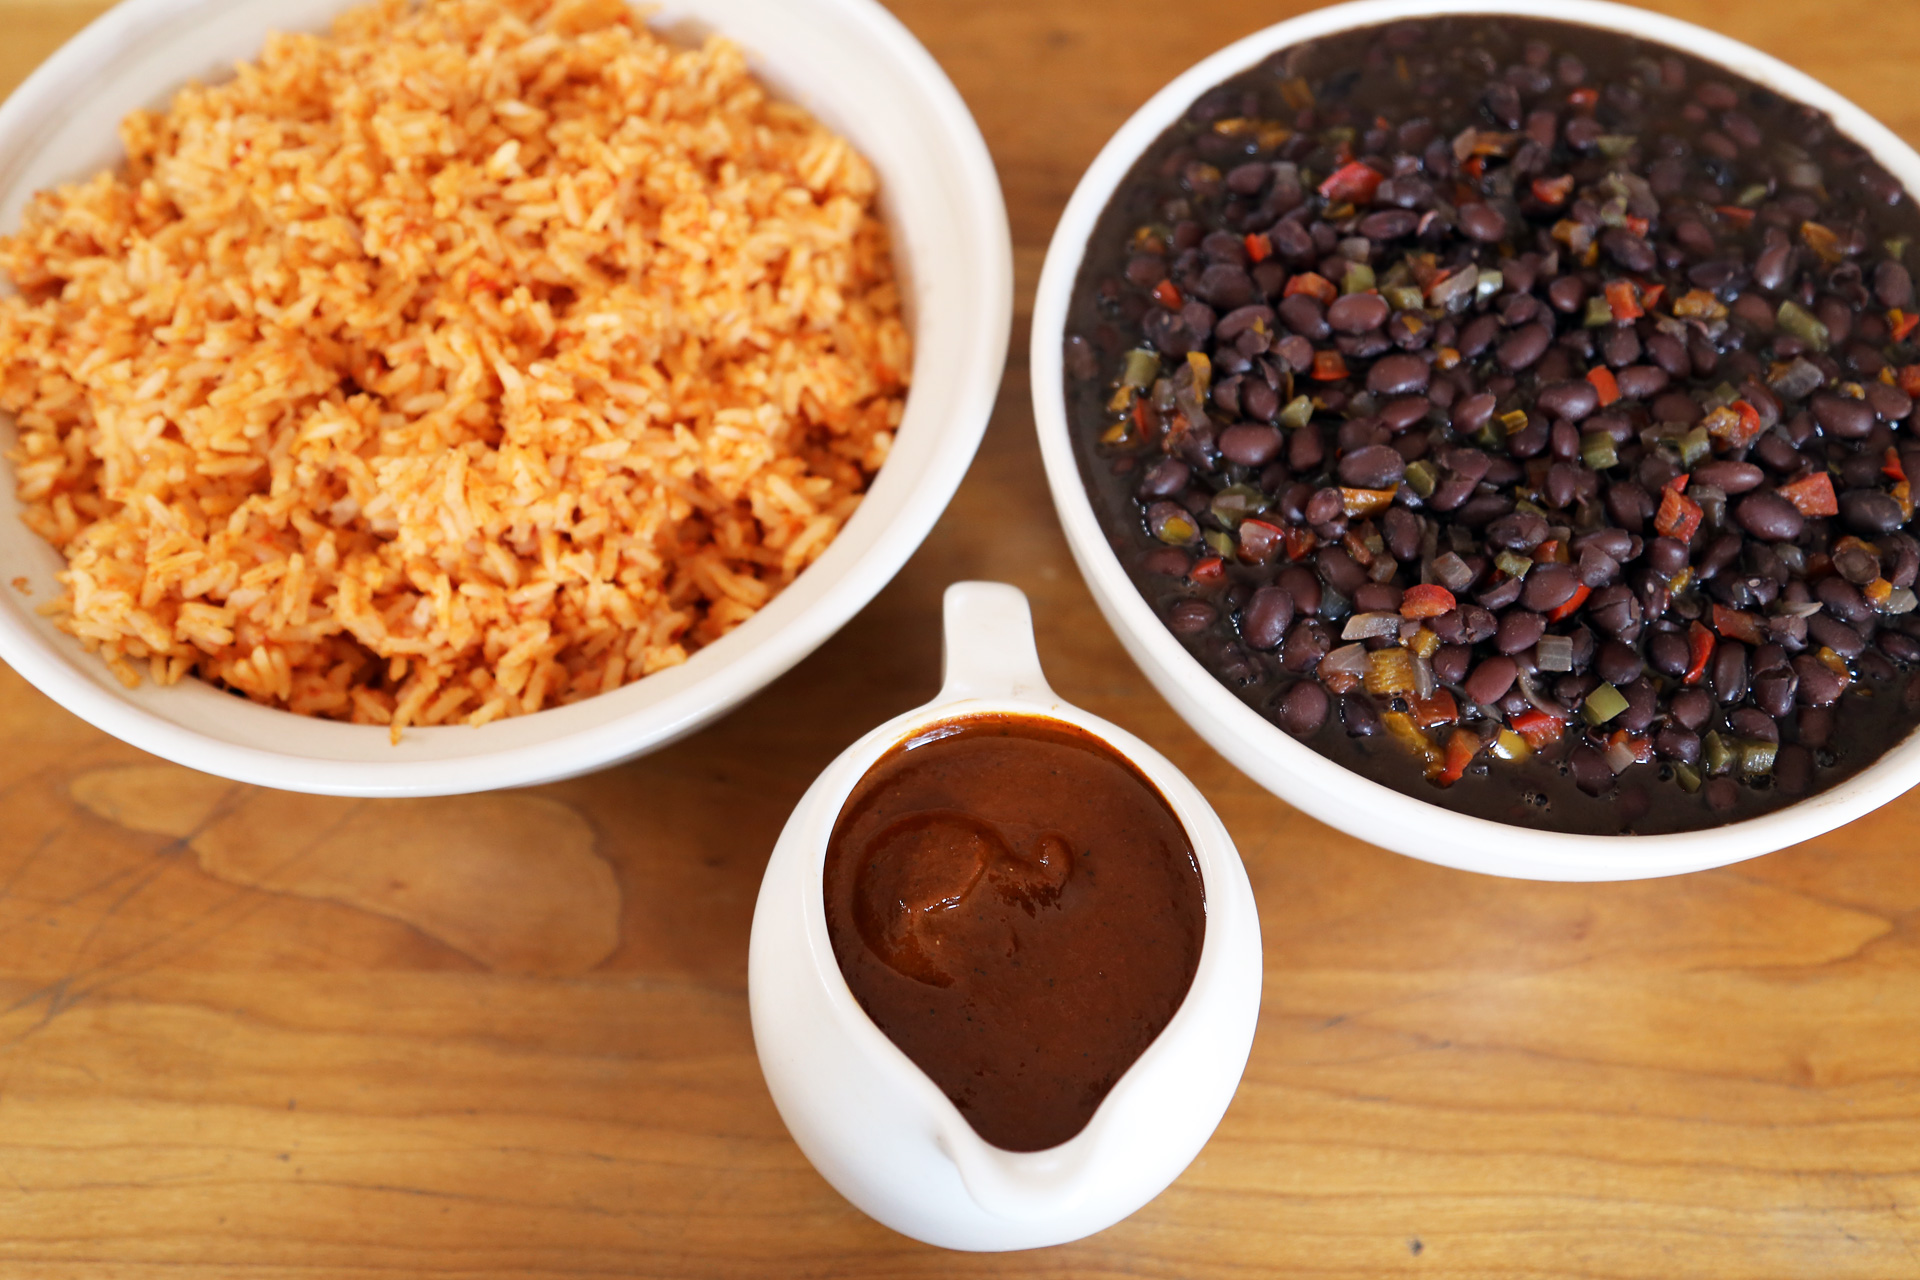  Spicy Mole Gravy with Mexican Rice and Savory Black Beans